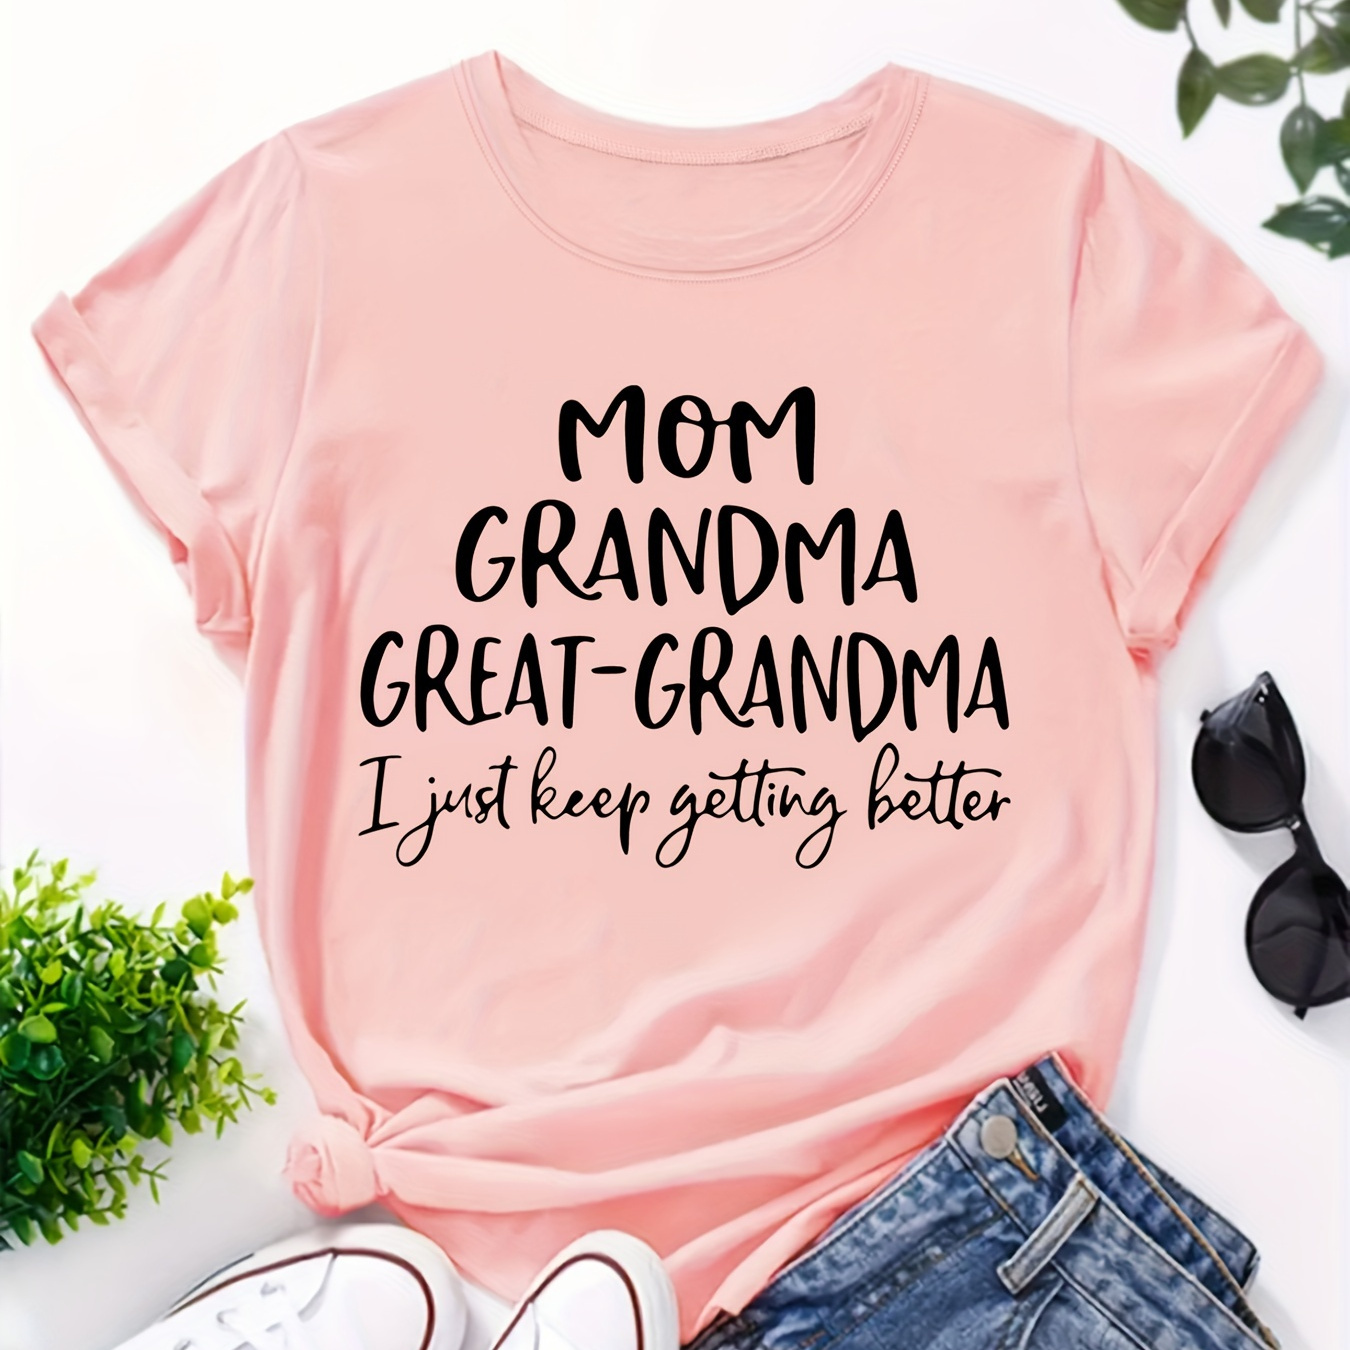 

Plus Size Mom & Grandma Print T-shirt, Casual Short Sleeve Crew Neck Top For Spring & Summer, Women's Plus Size Clothing